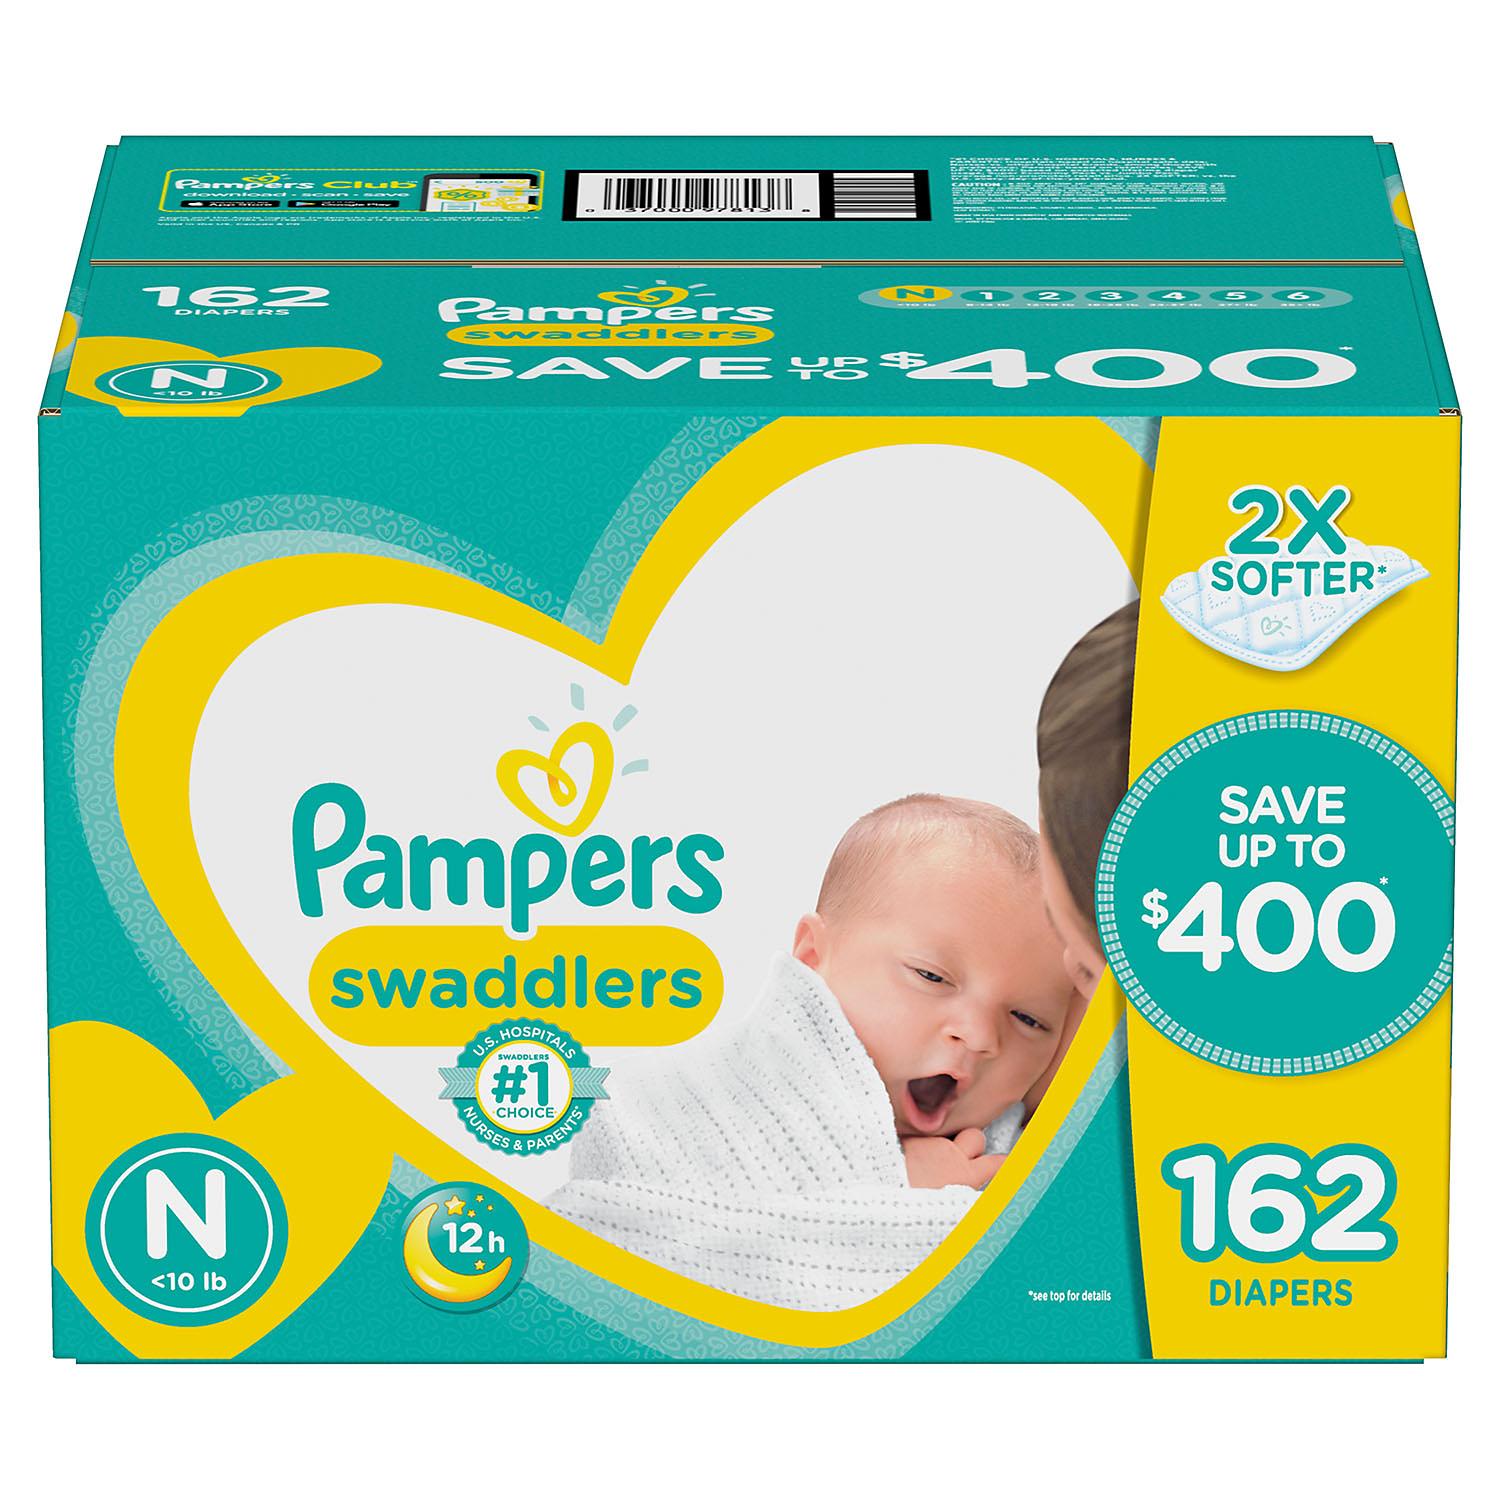 Which Pampers Diaper to Choose?